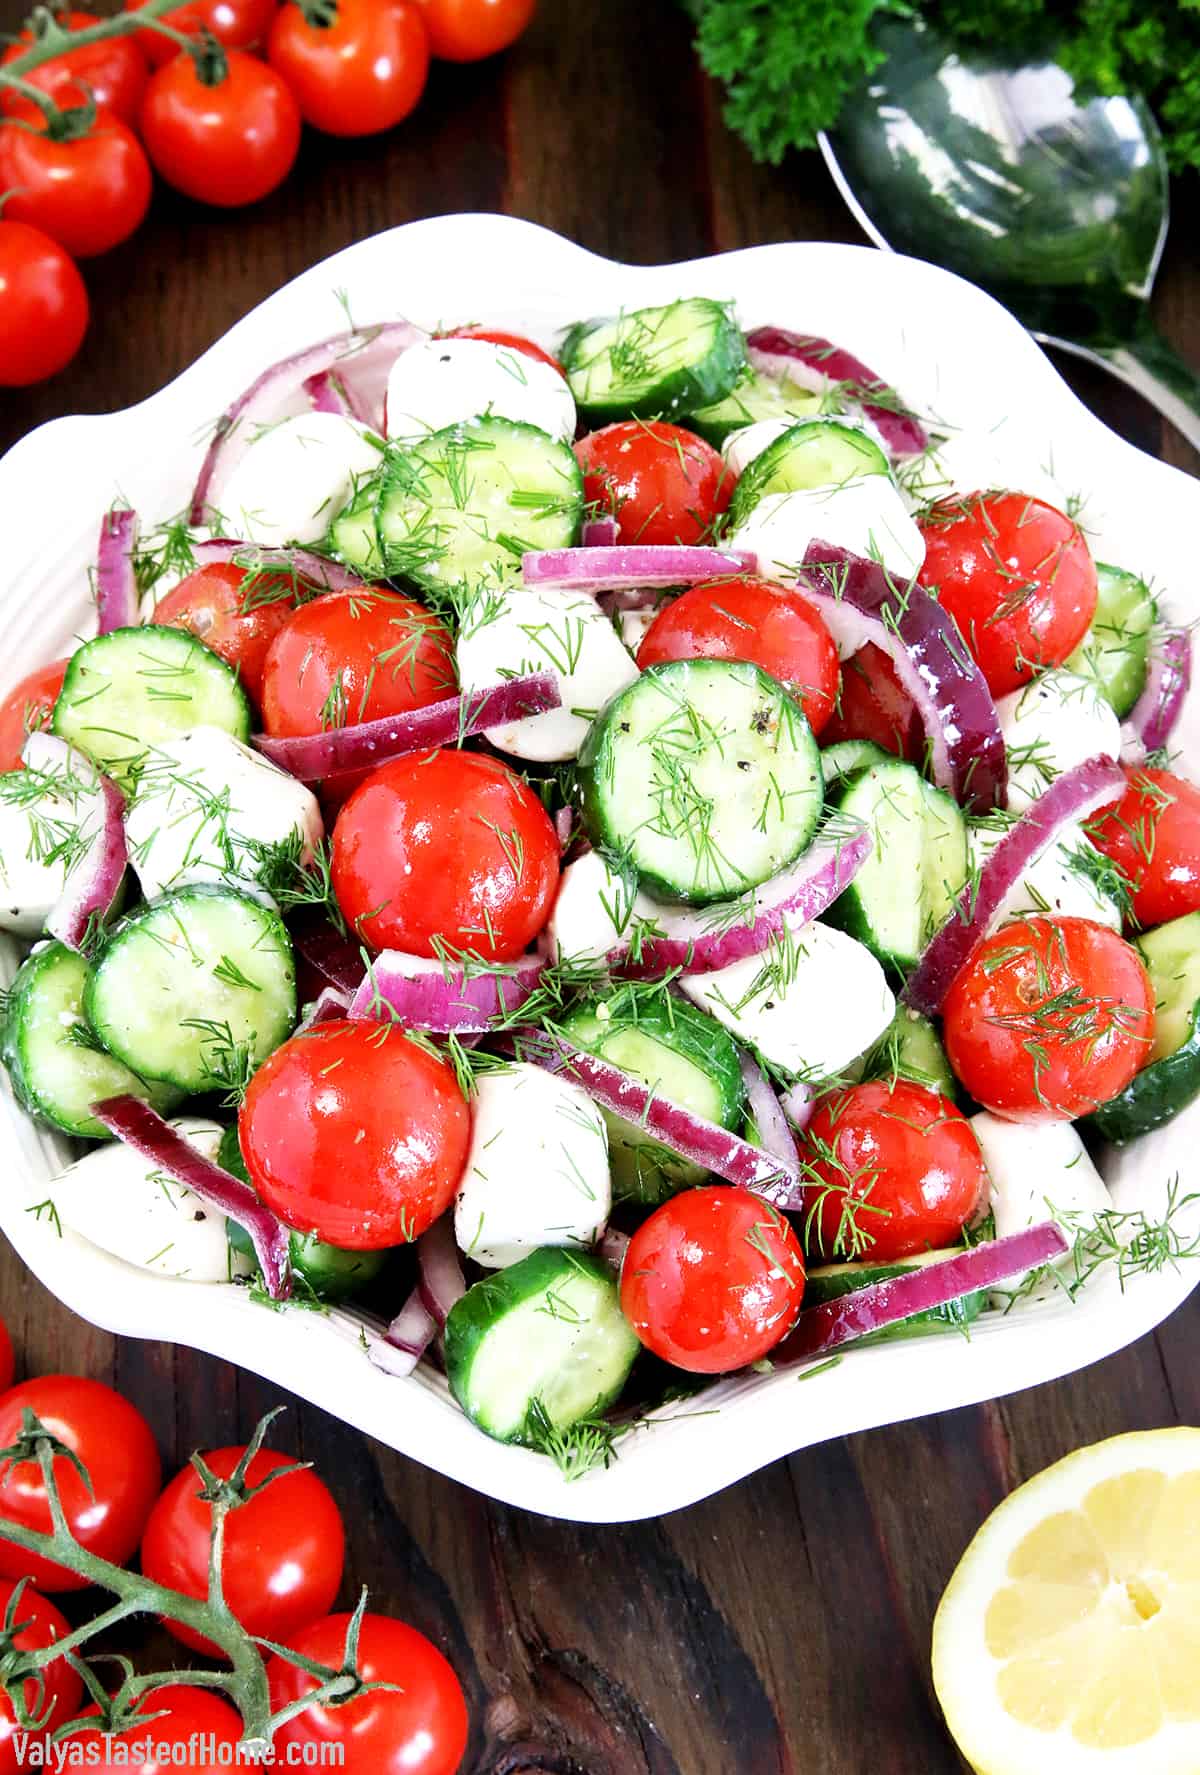 Adding mozzarella balls to your tomato salad is the ideal way to take it to the next level. It offers a good protein boost with the correct balance of crunch and soft cheese.